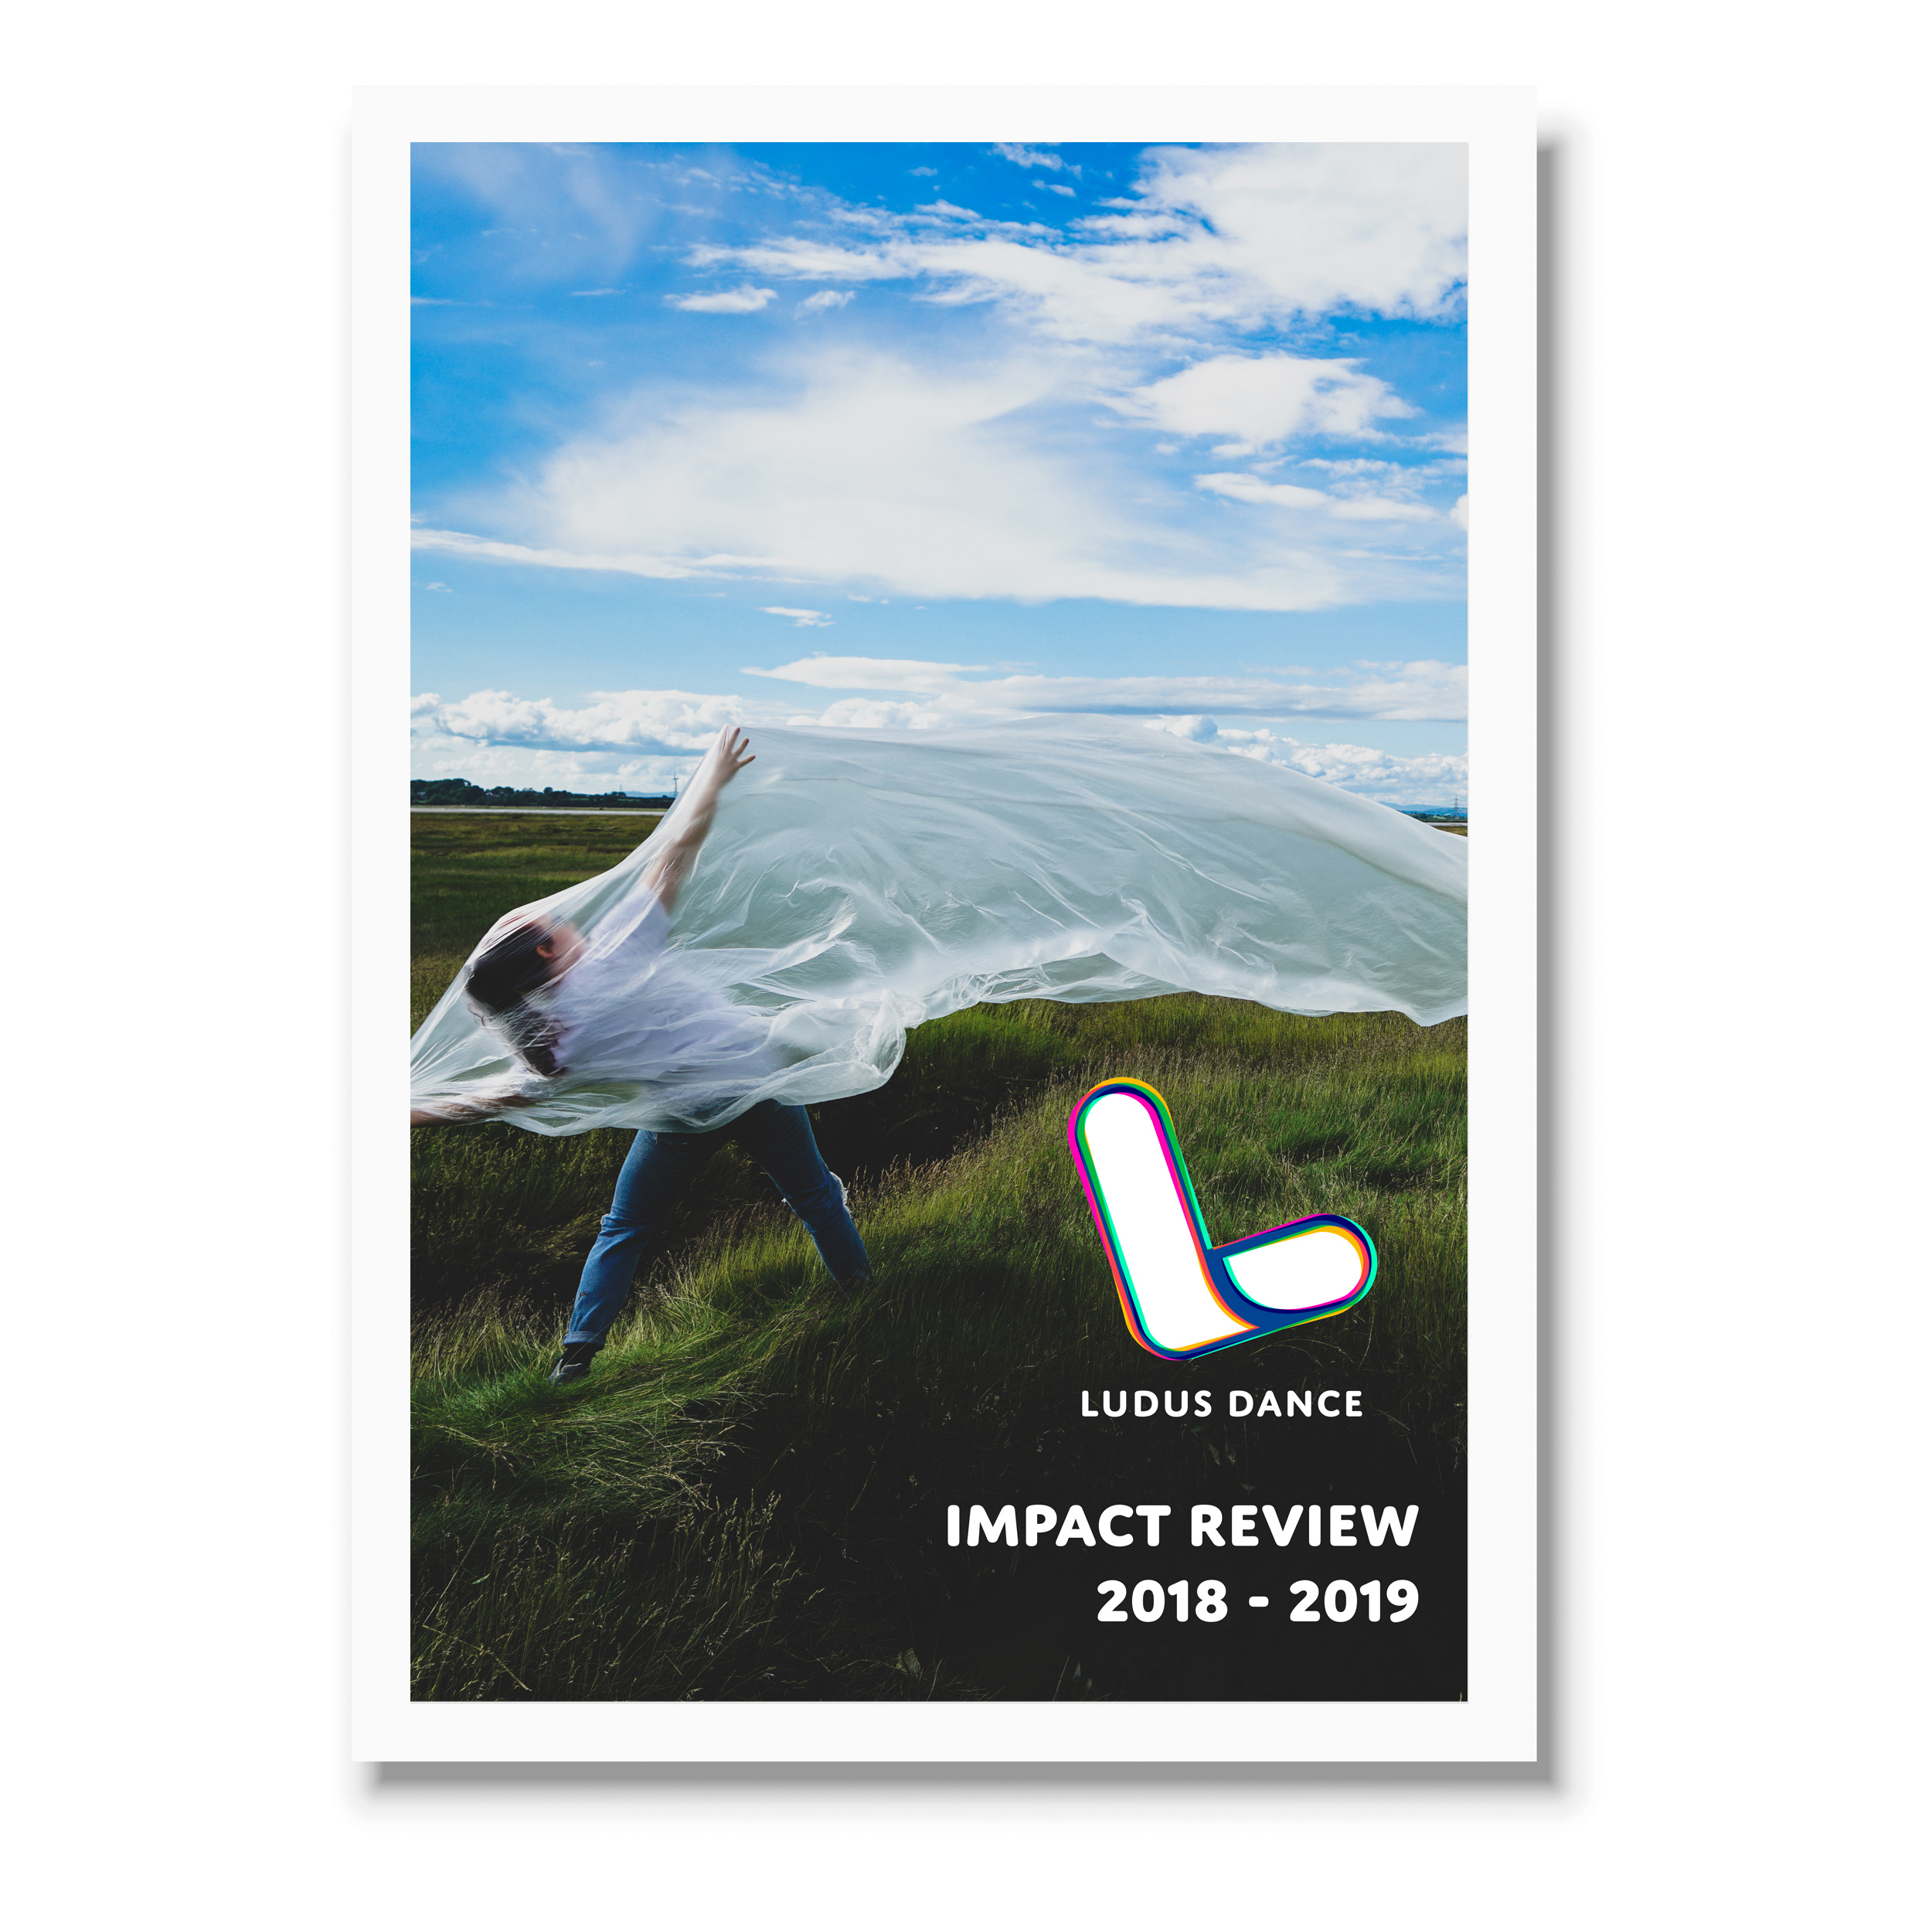 For Ludus Dance (Impact Review)